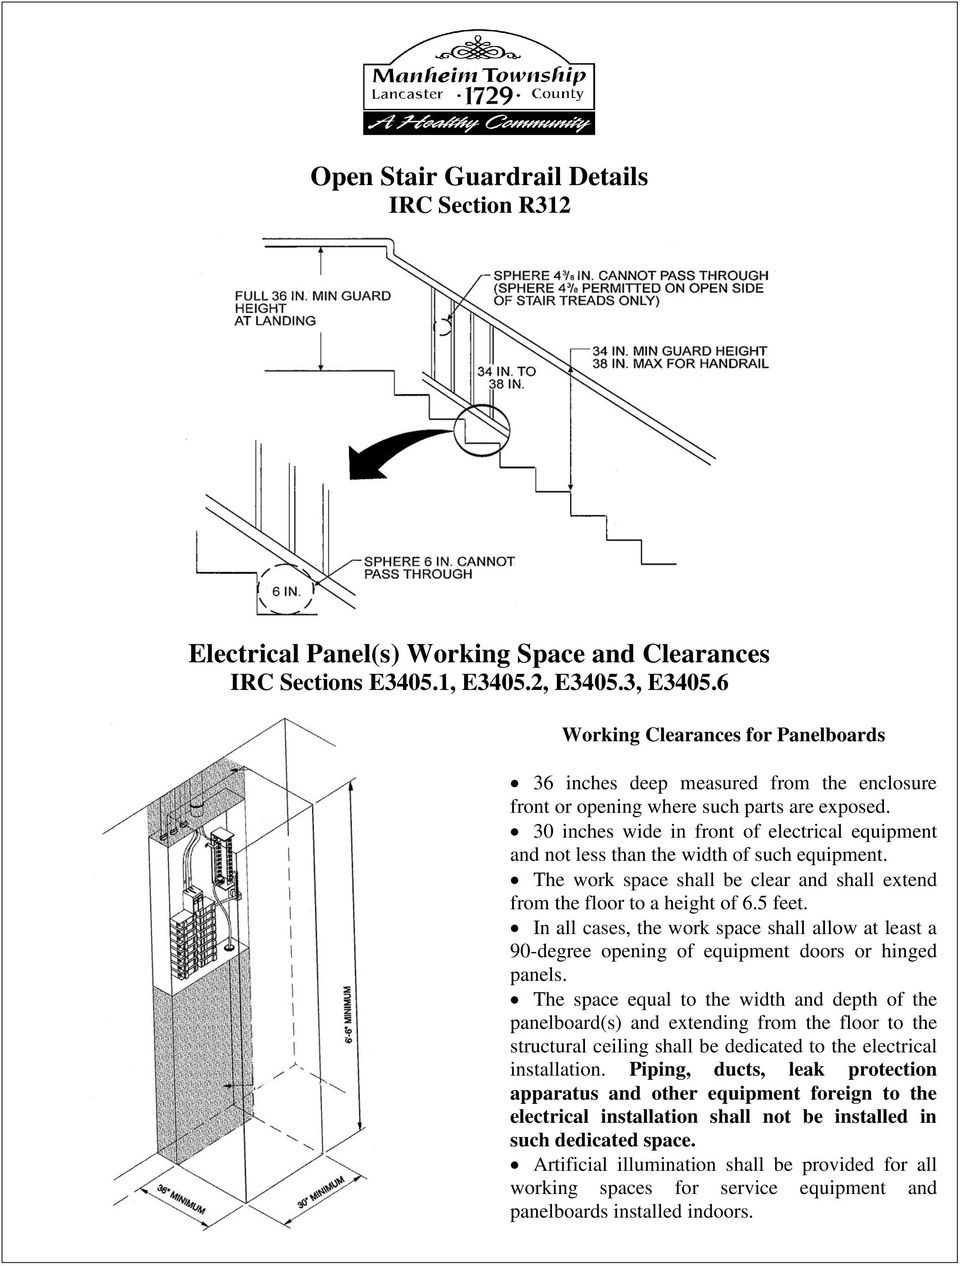 30 inches wide in front of electrical equipment and not less than the width of such equipment. The work space shall be clear and shall extend from the floor to a height of 6.5 feet.